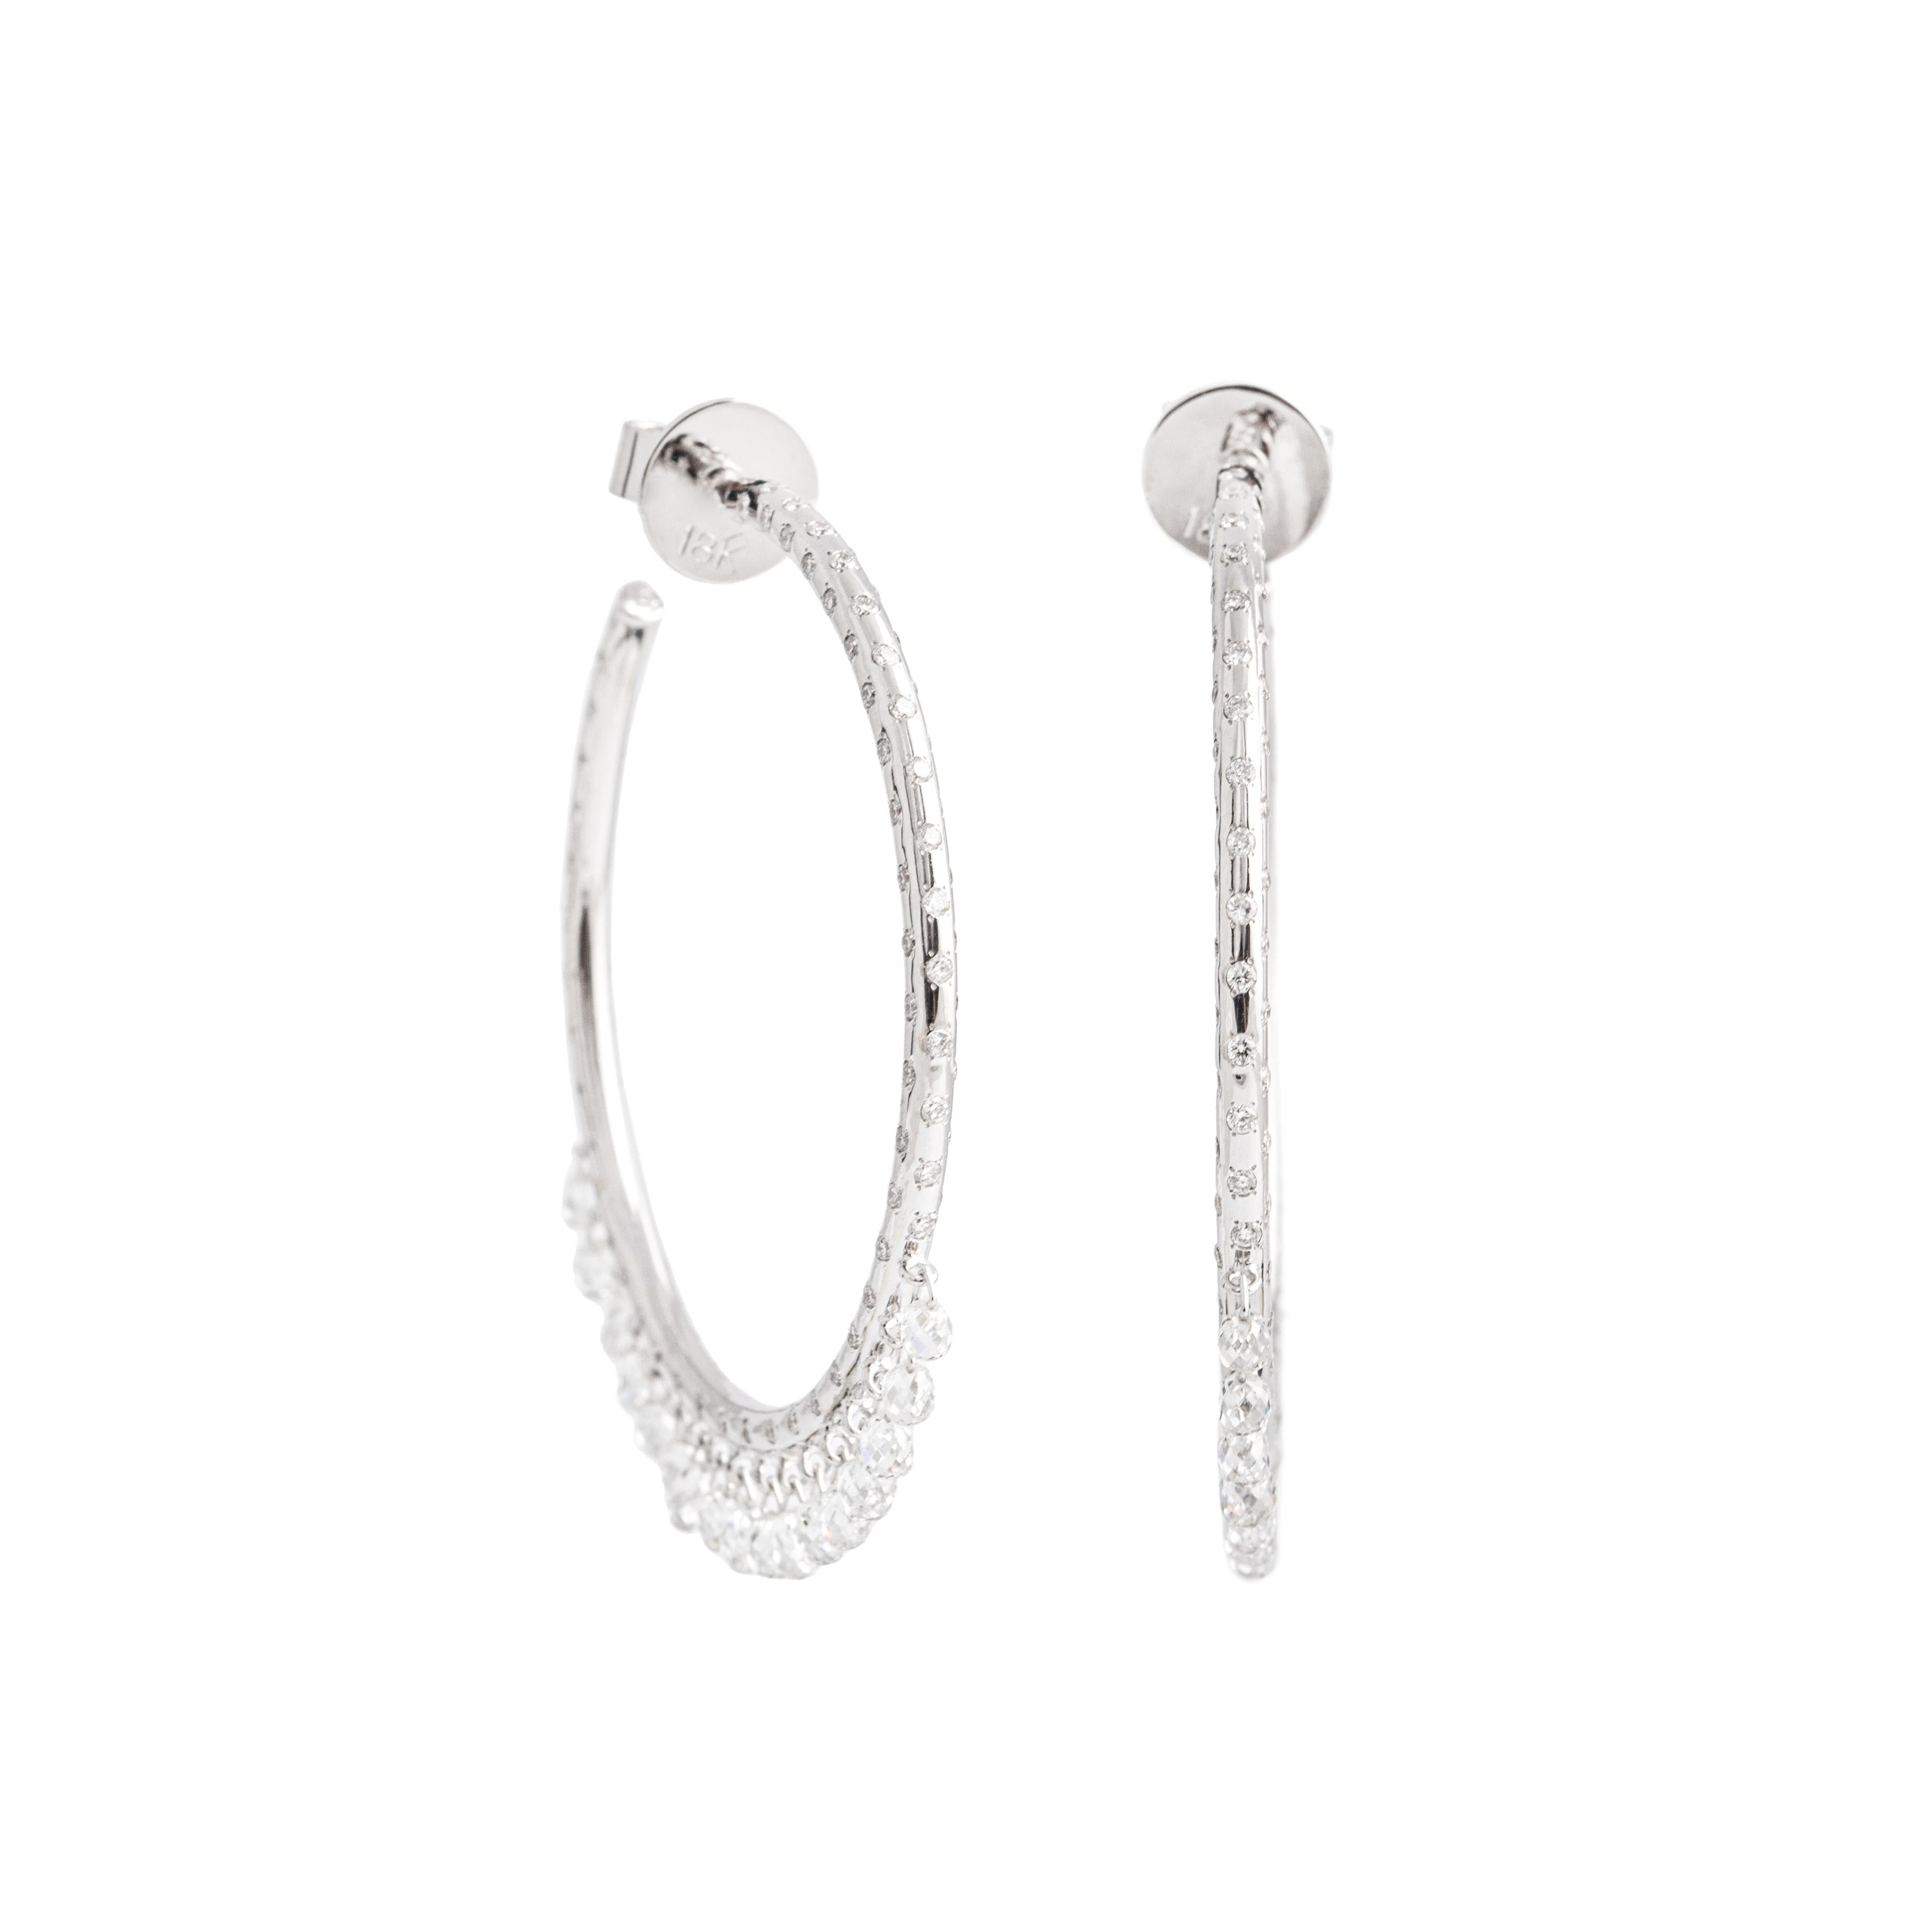 Hoop Earrings in white gold 18K briolette cut and round diamond estimated G color. 
Diamond weighing 4.05 carats total.
Total gross weight: 9.21 grams.
Diameter: 4.00 centimeters.